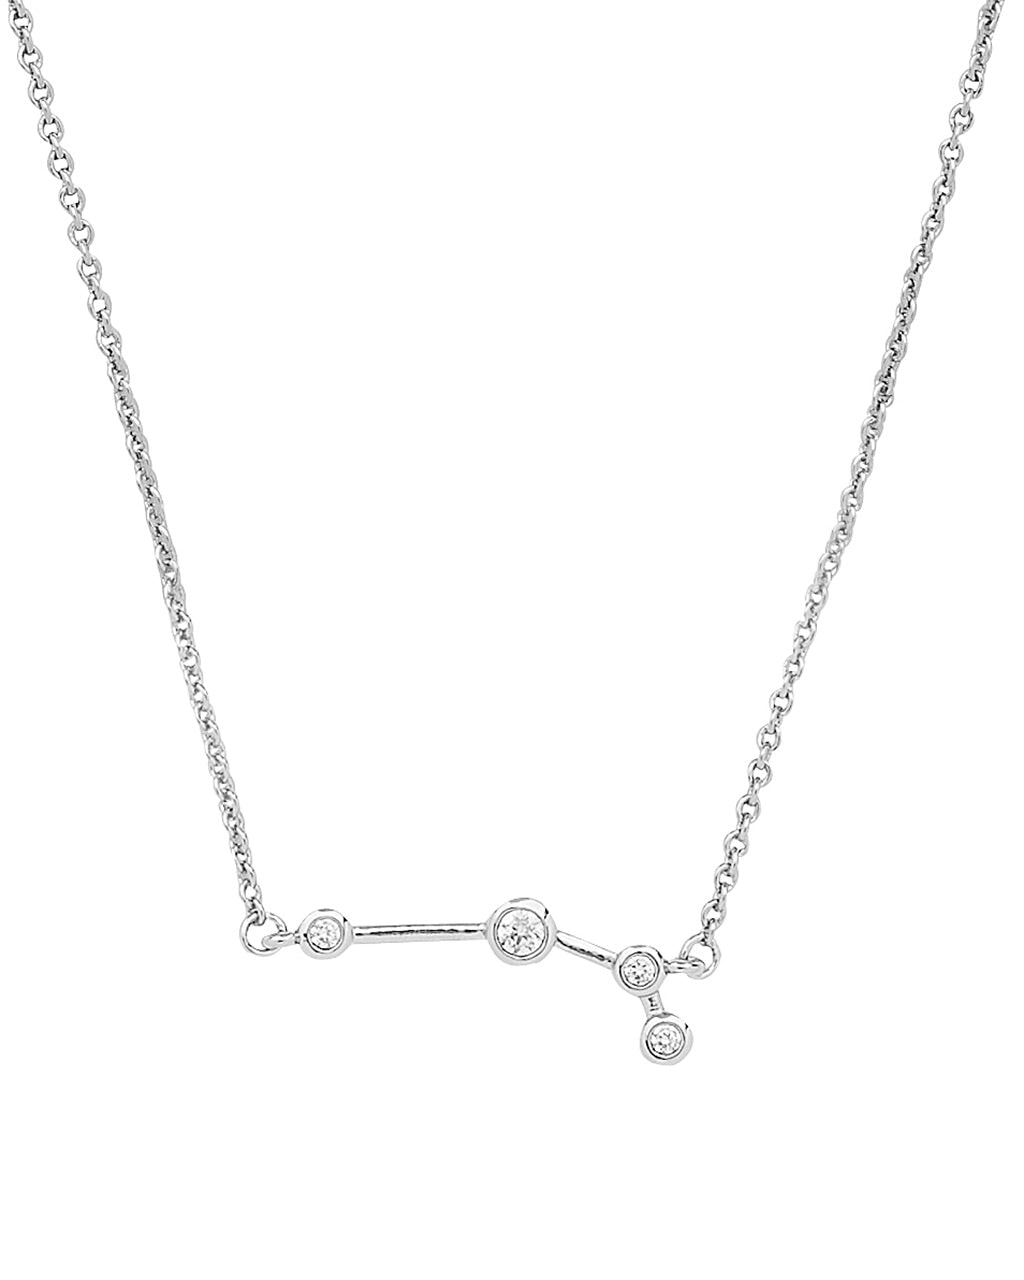 'When Stars Align' Constellation Necklace Necklace Sterling Forever Silver Aries (Mar 21 - Apr 19) 